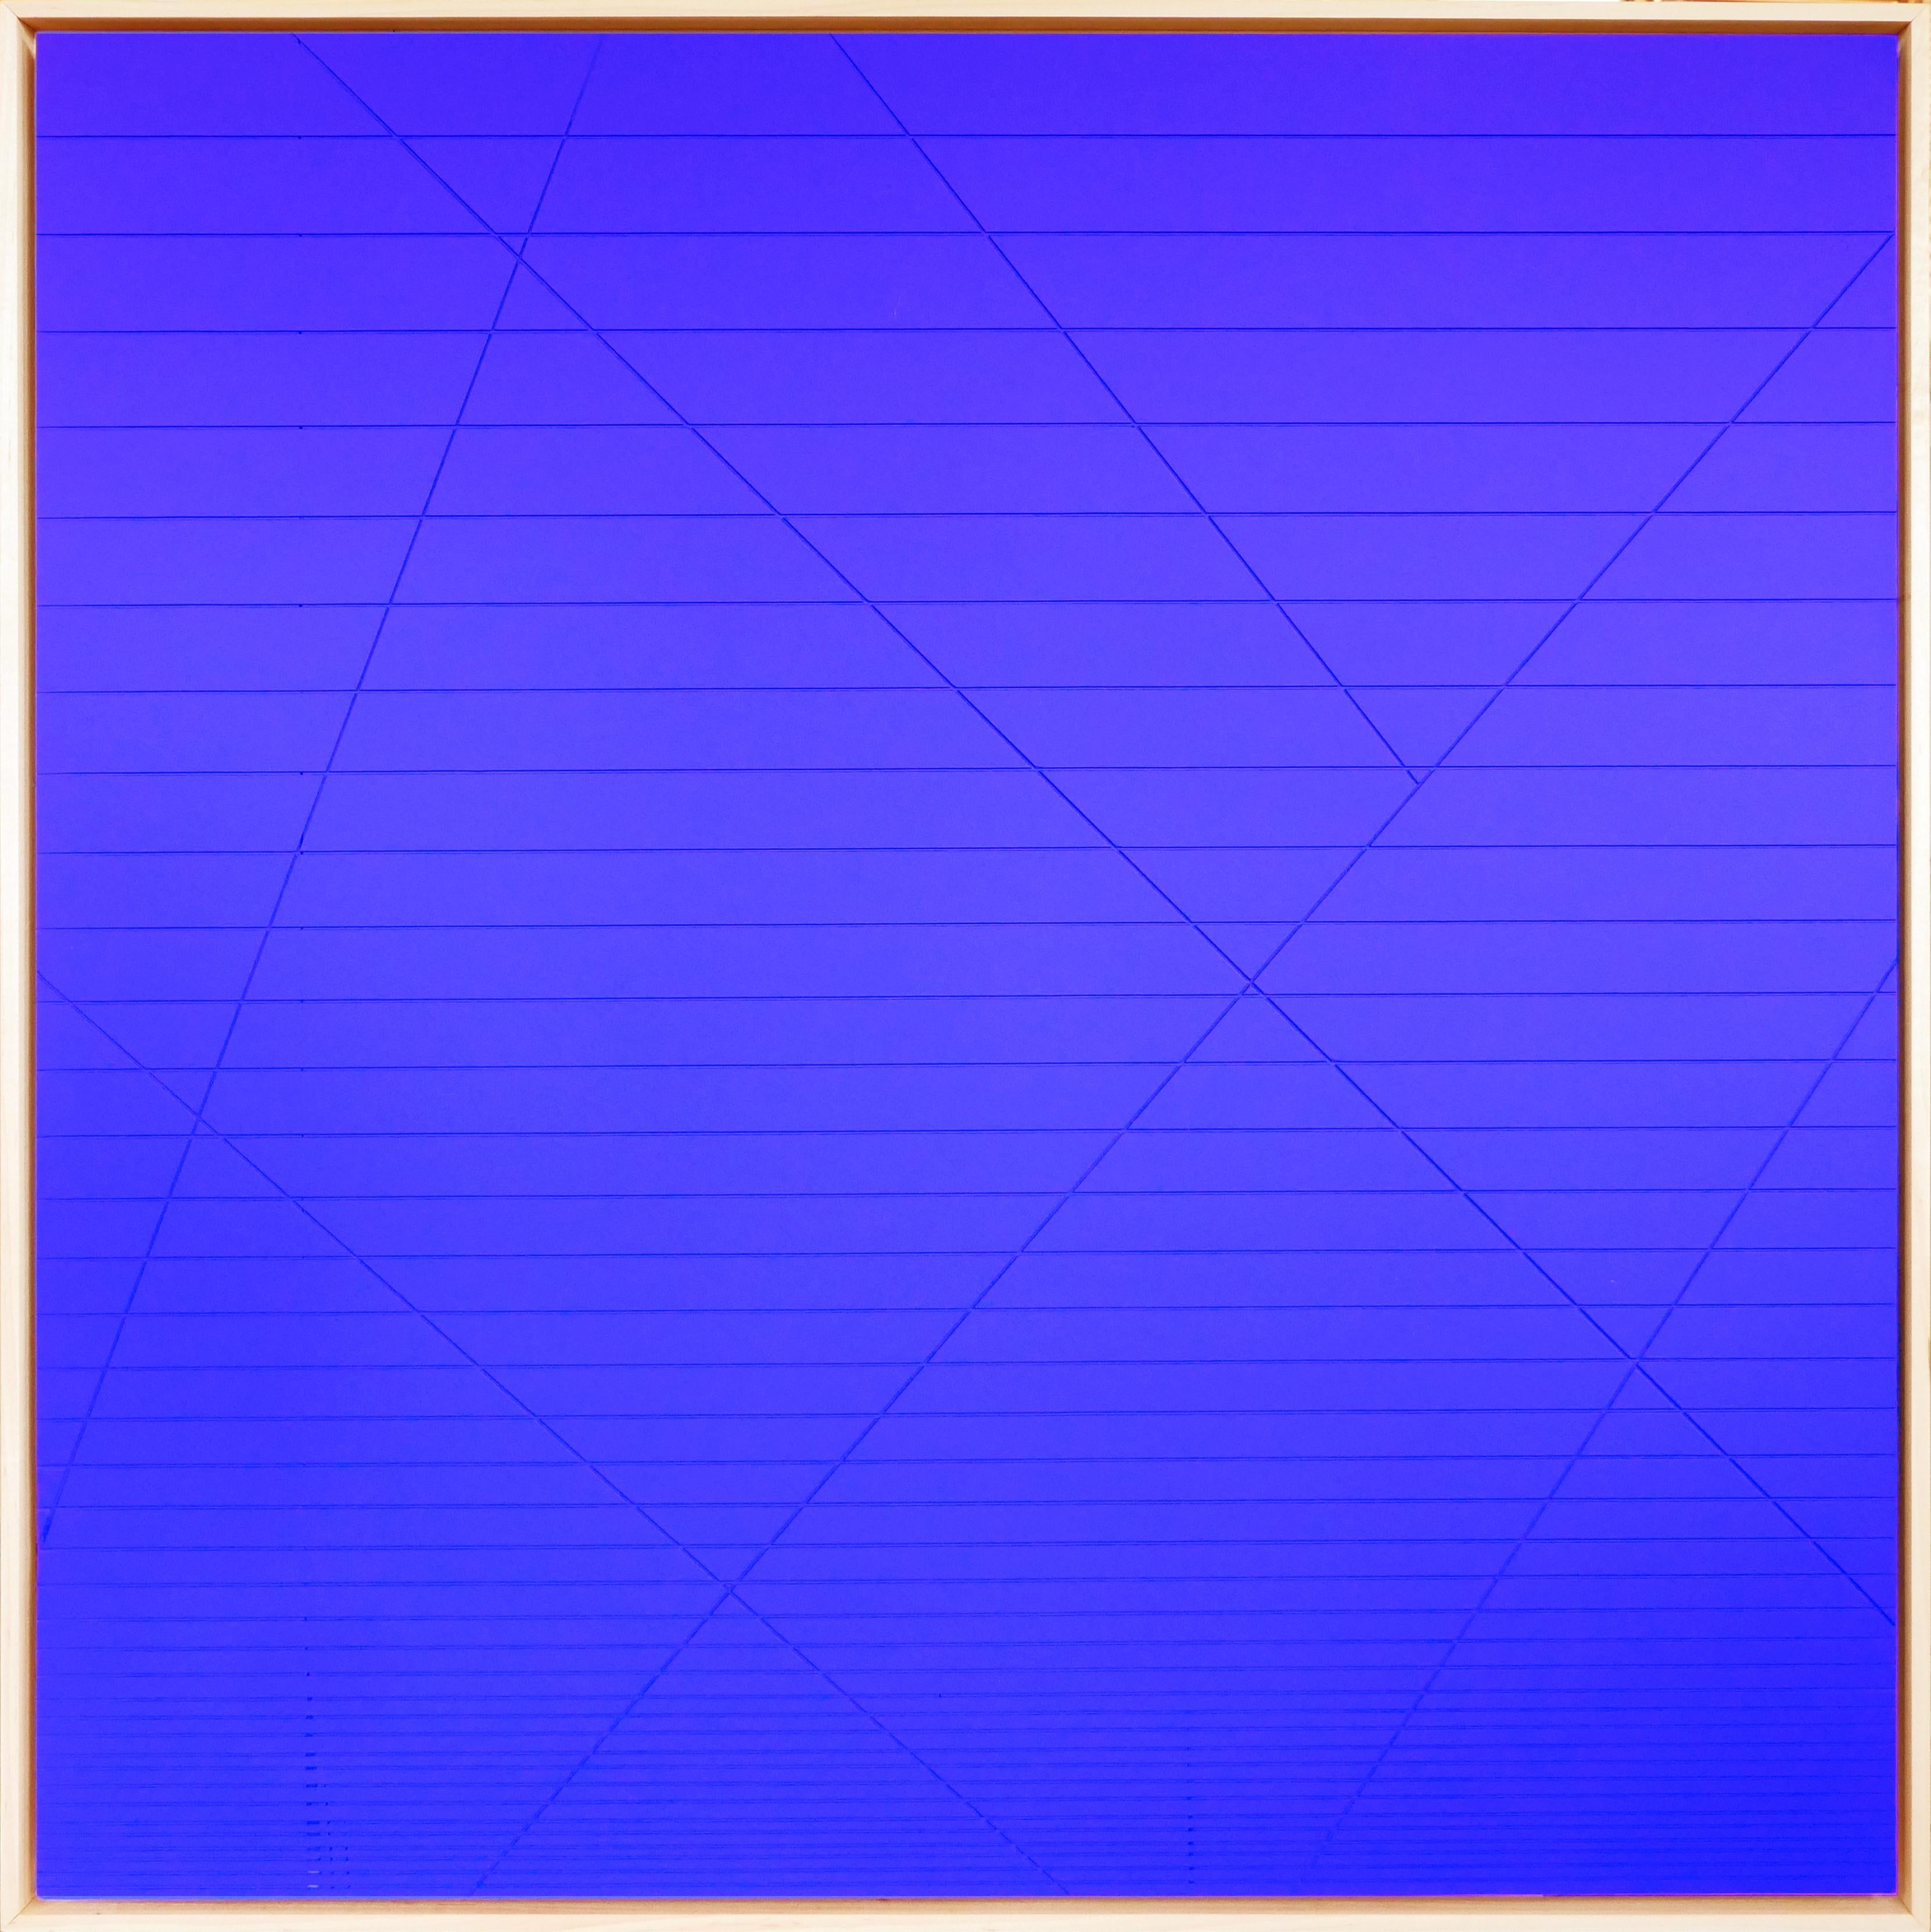 Matthew Reeves Abstract Painting - Contemporary Abstract Bright Blue Geometric Linear Groove Painting / Sculpture